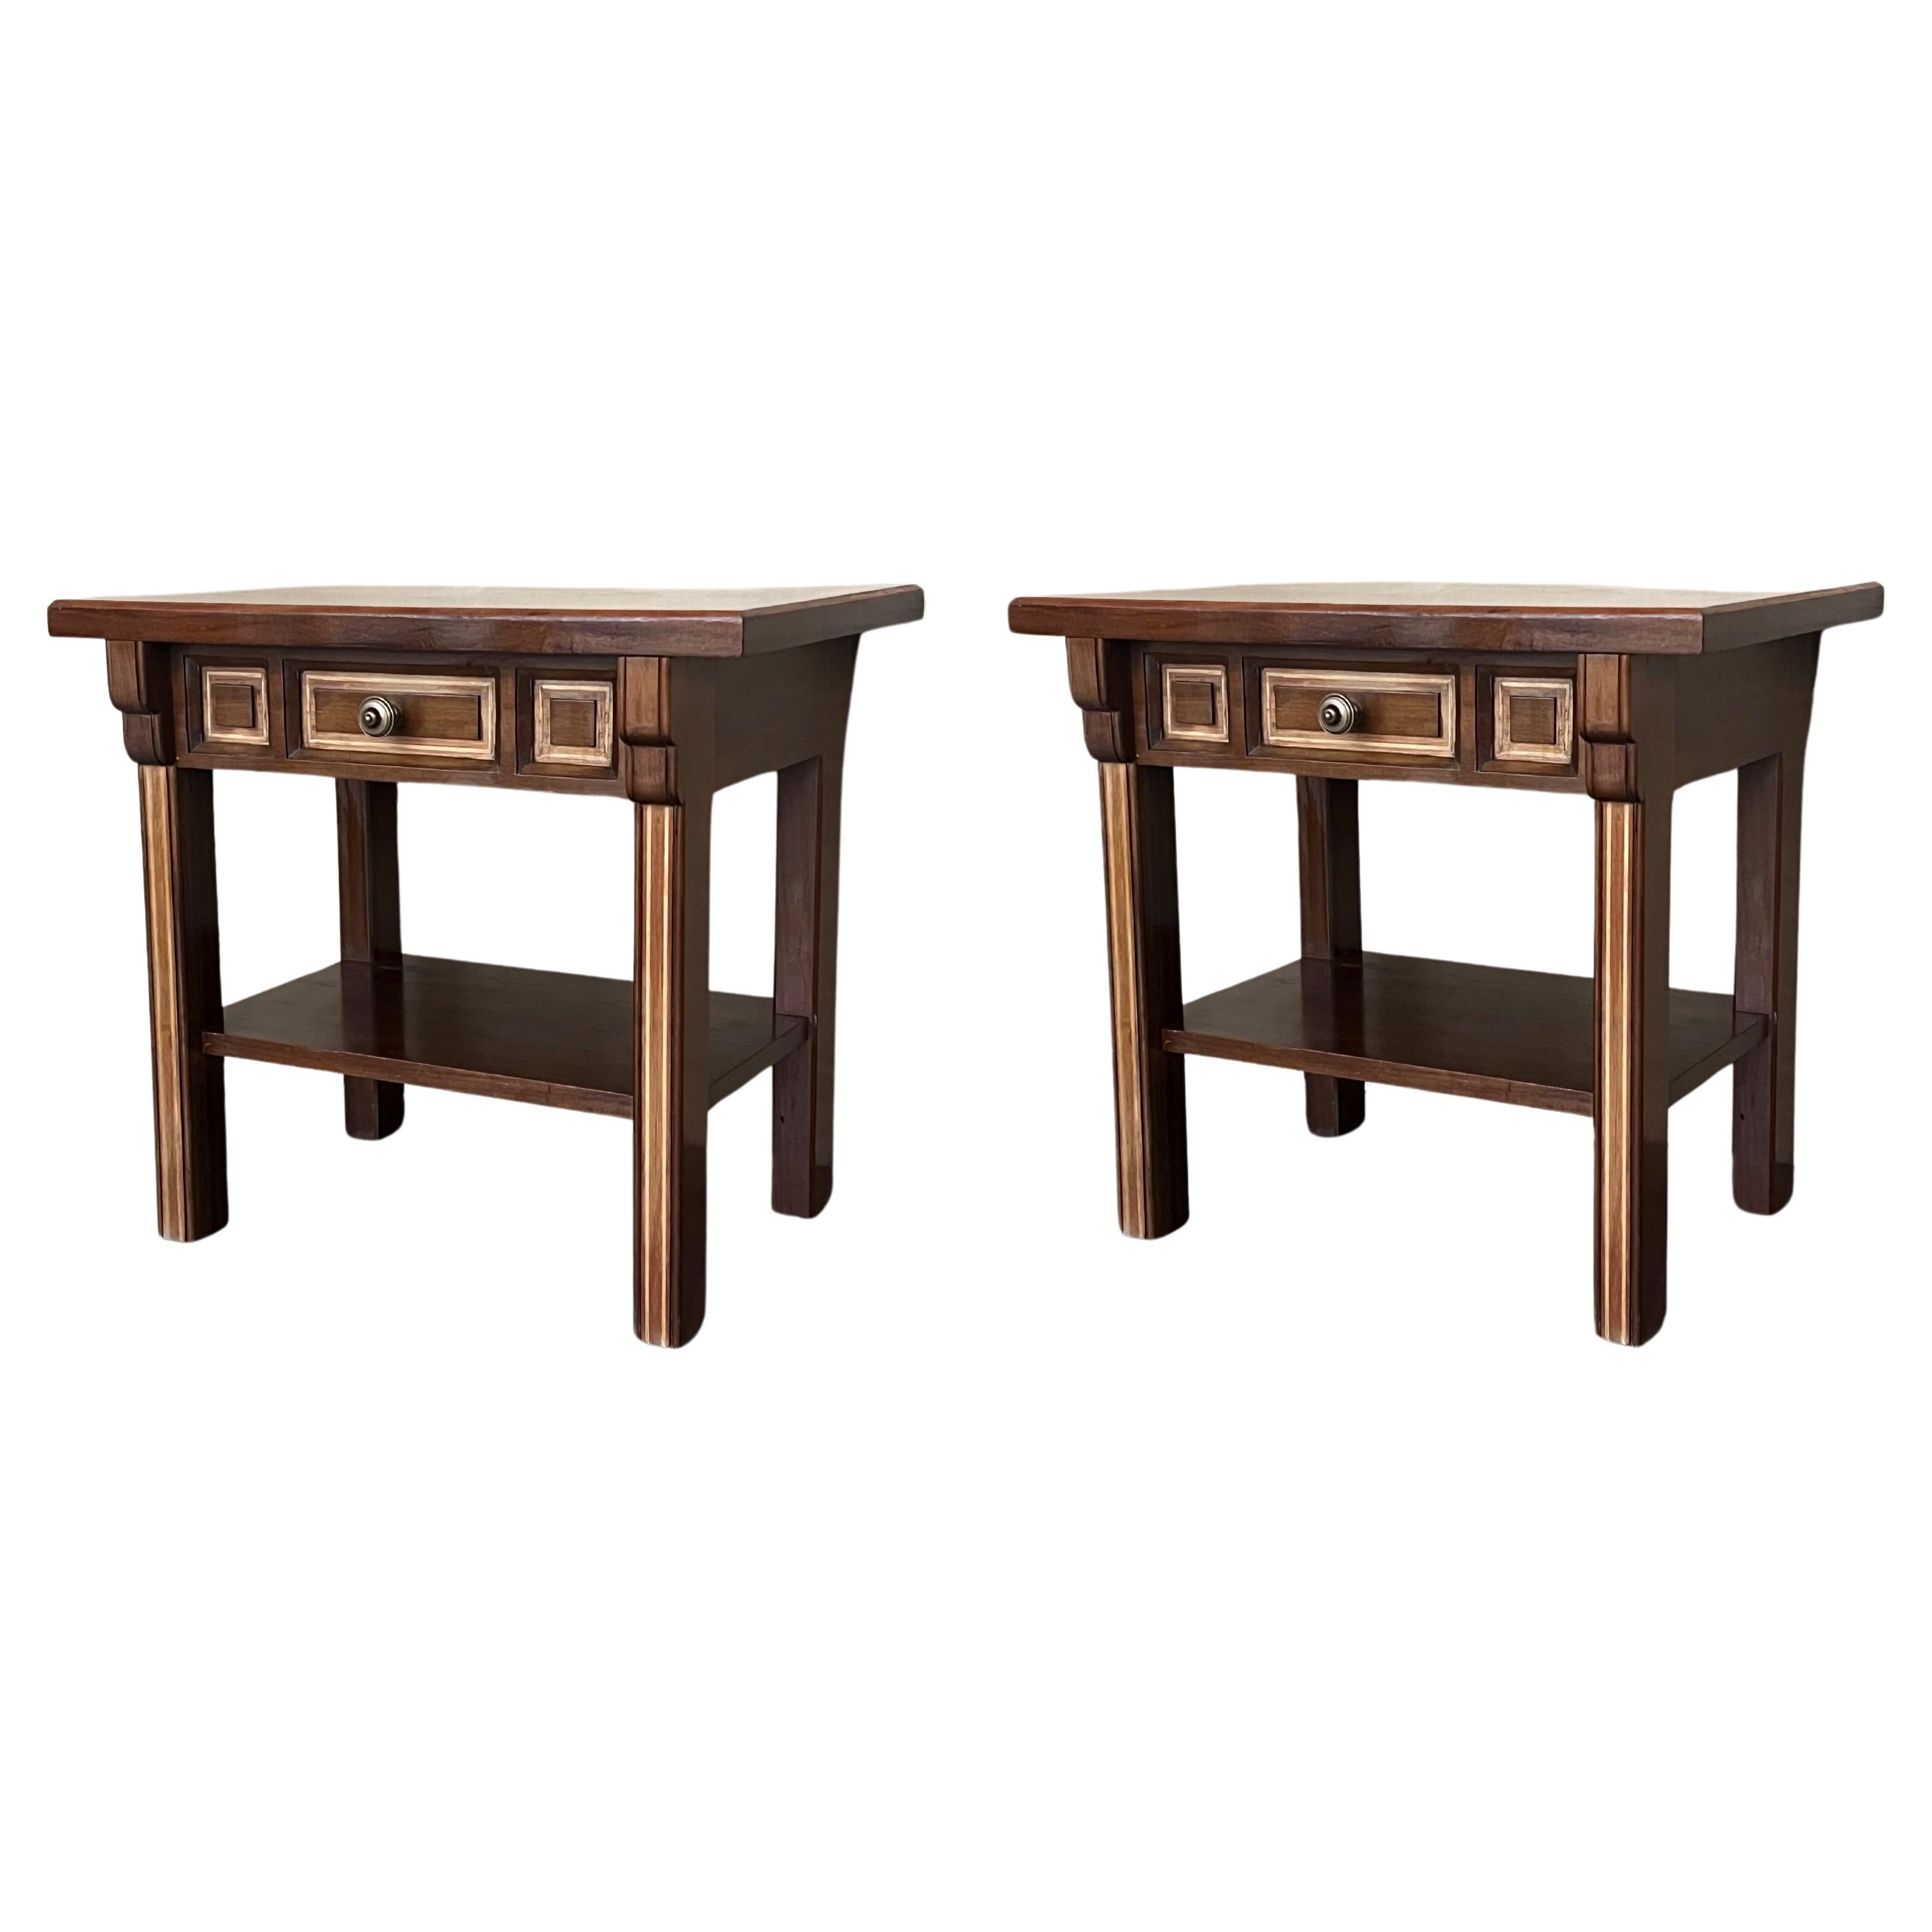 20th Pair of Spanish Nightstands with Drawer and Low shelve